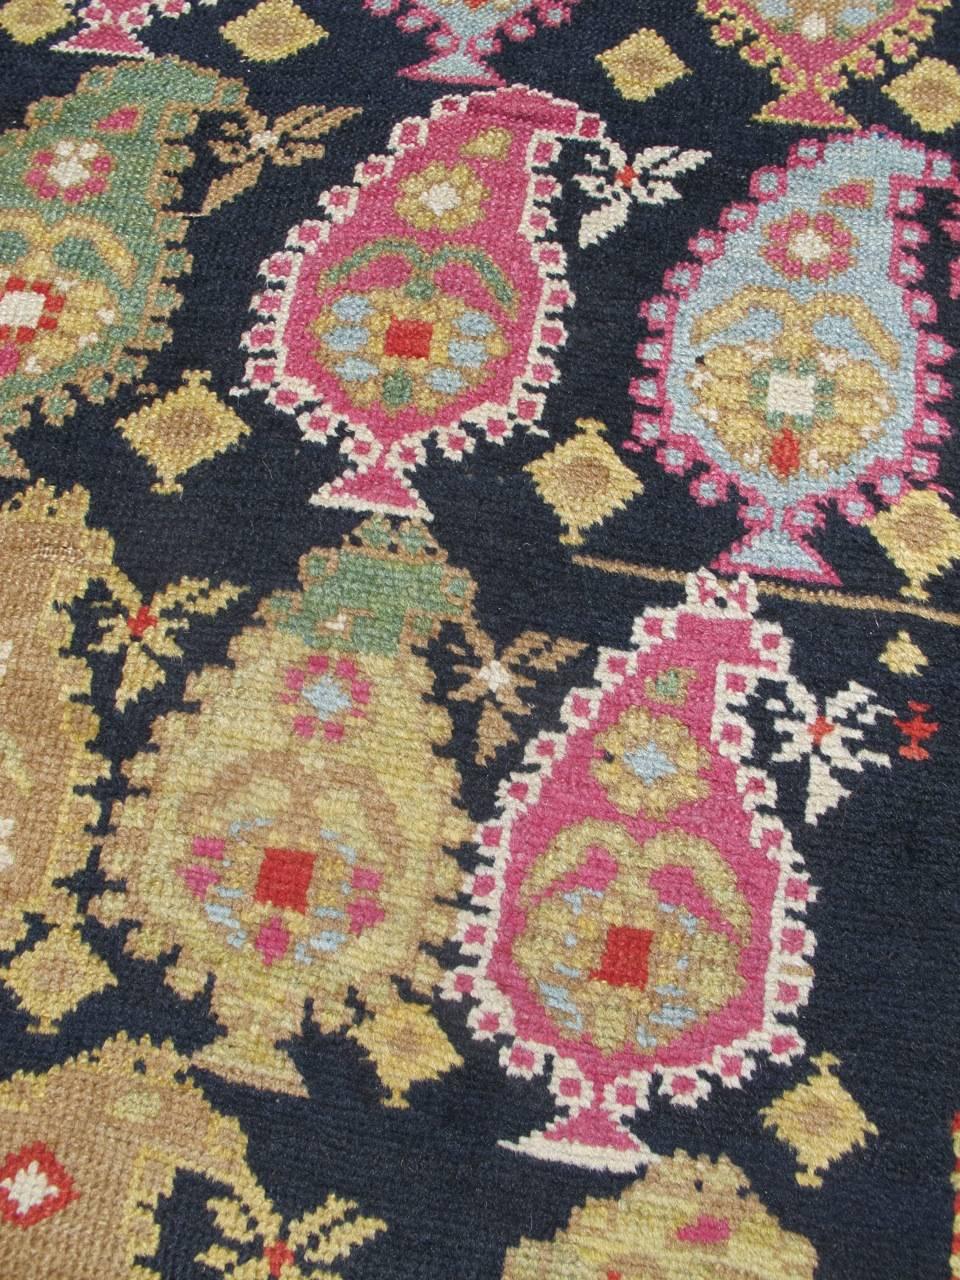 Caucasian Late 19th Century Red and Indigo Karabagh Rug with Paisleys